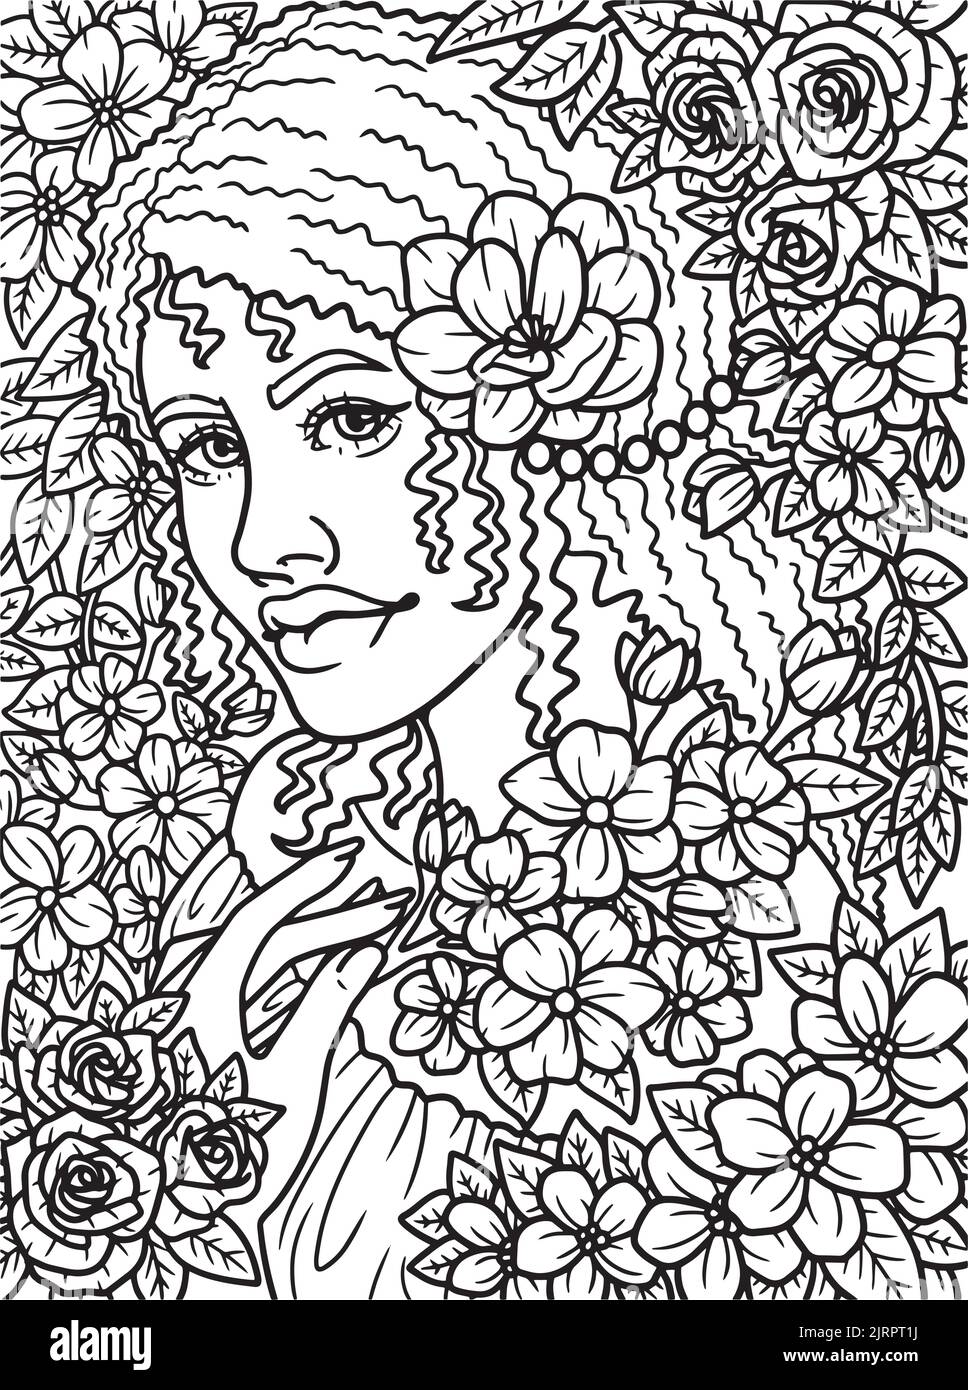 Afro American Cute Flower Girl Coloring Page  Stock Vector